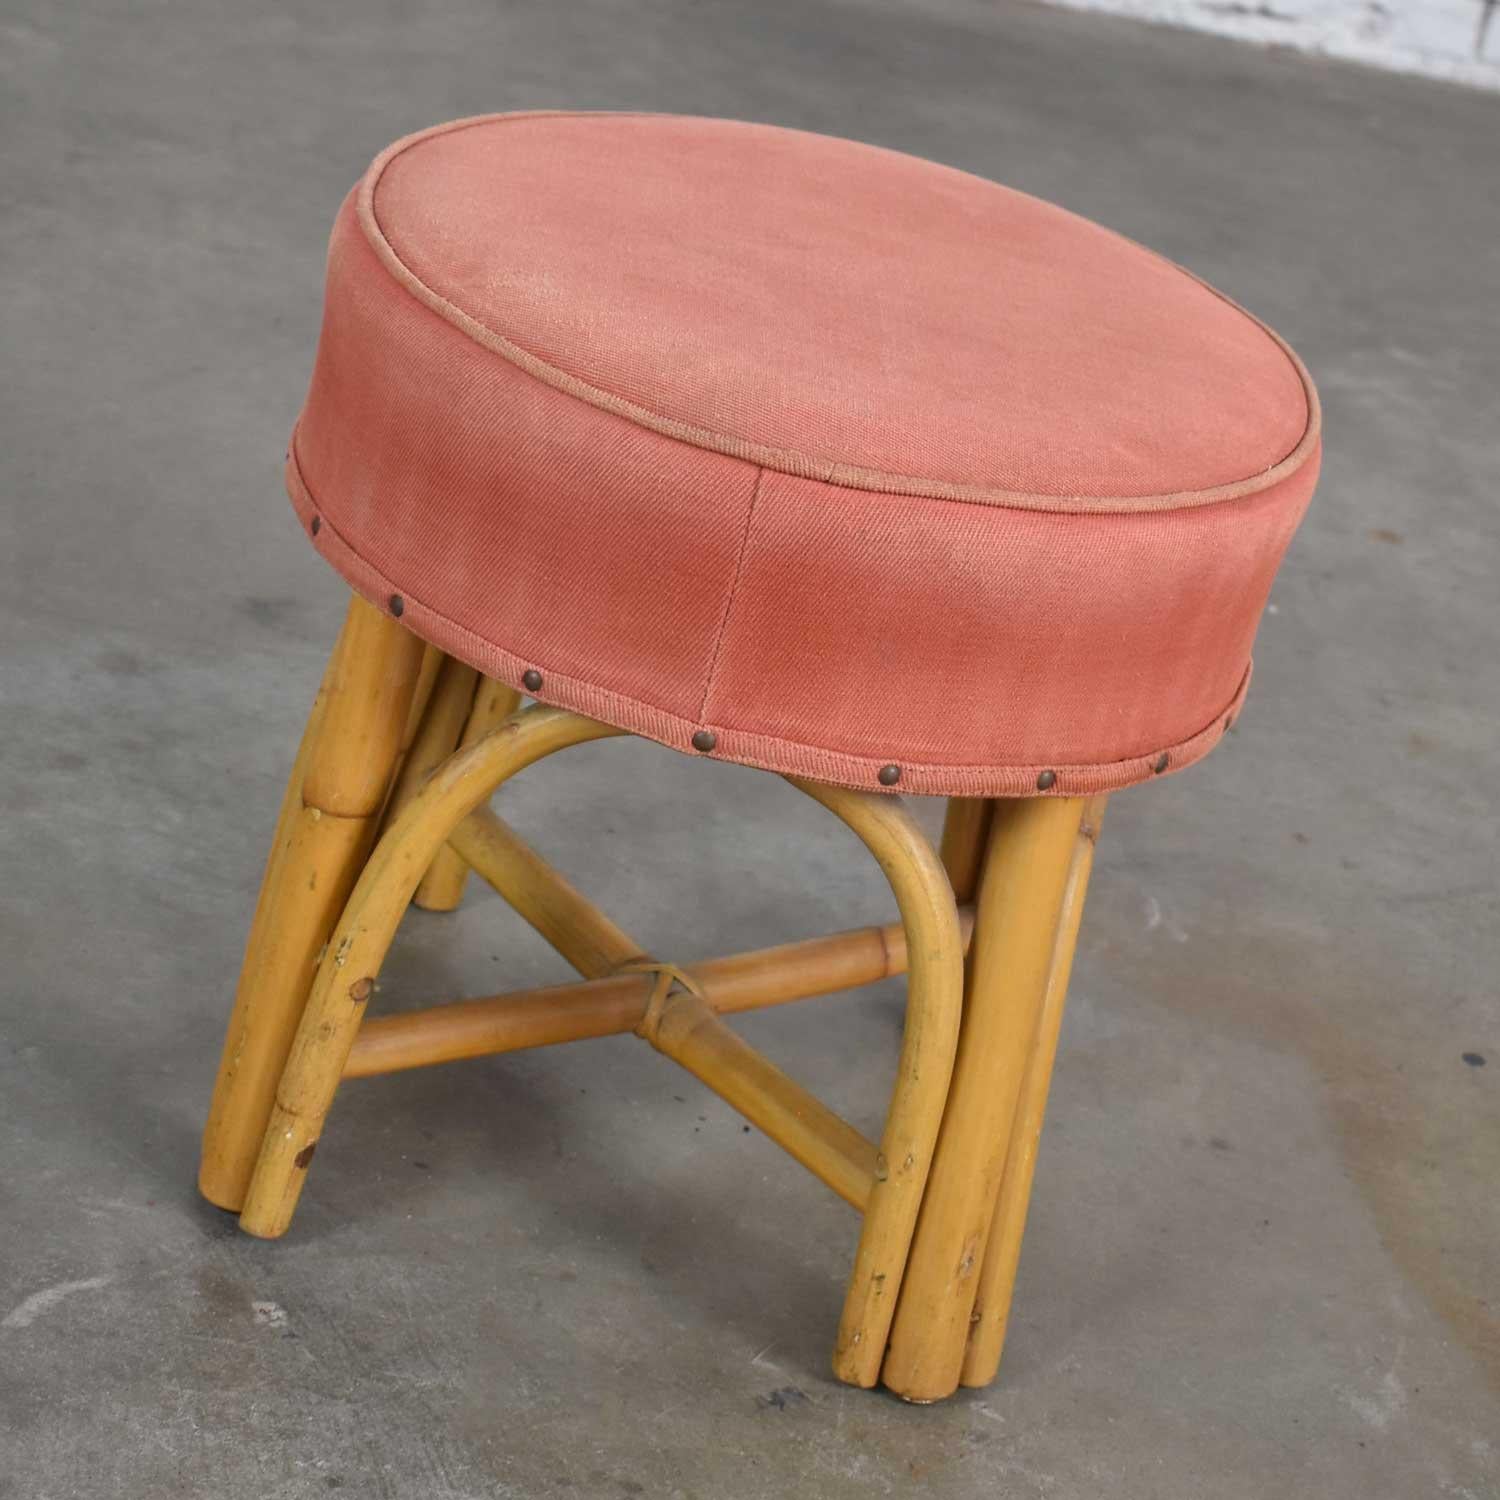 20th Century Vintage Round Rattan Low Foot Stool Ottoman or Tuffet Original Upholstered Top